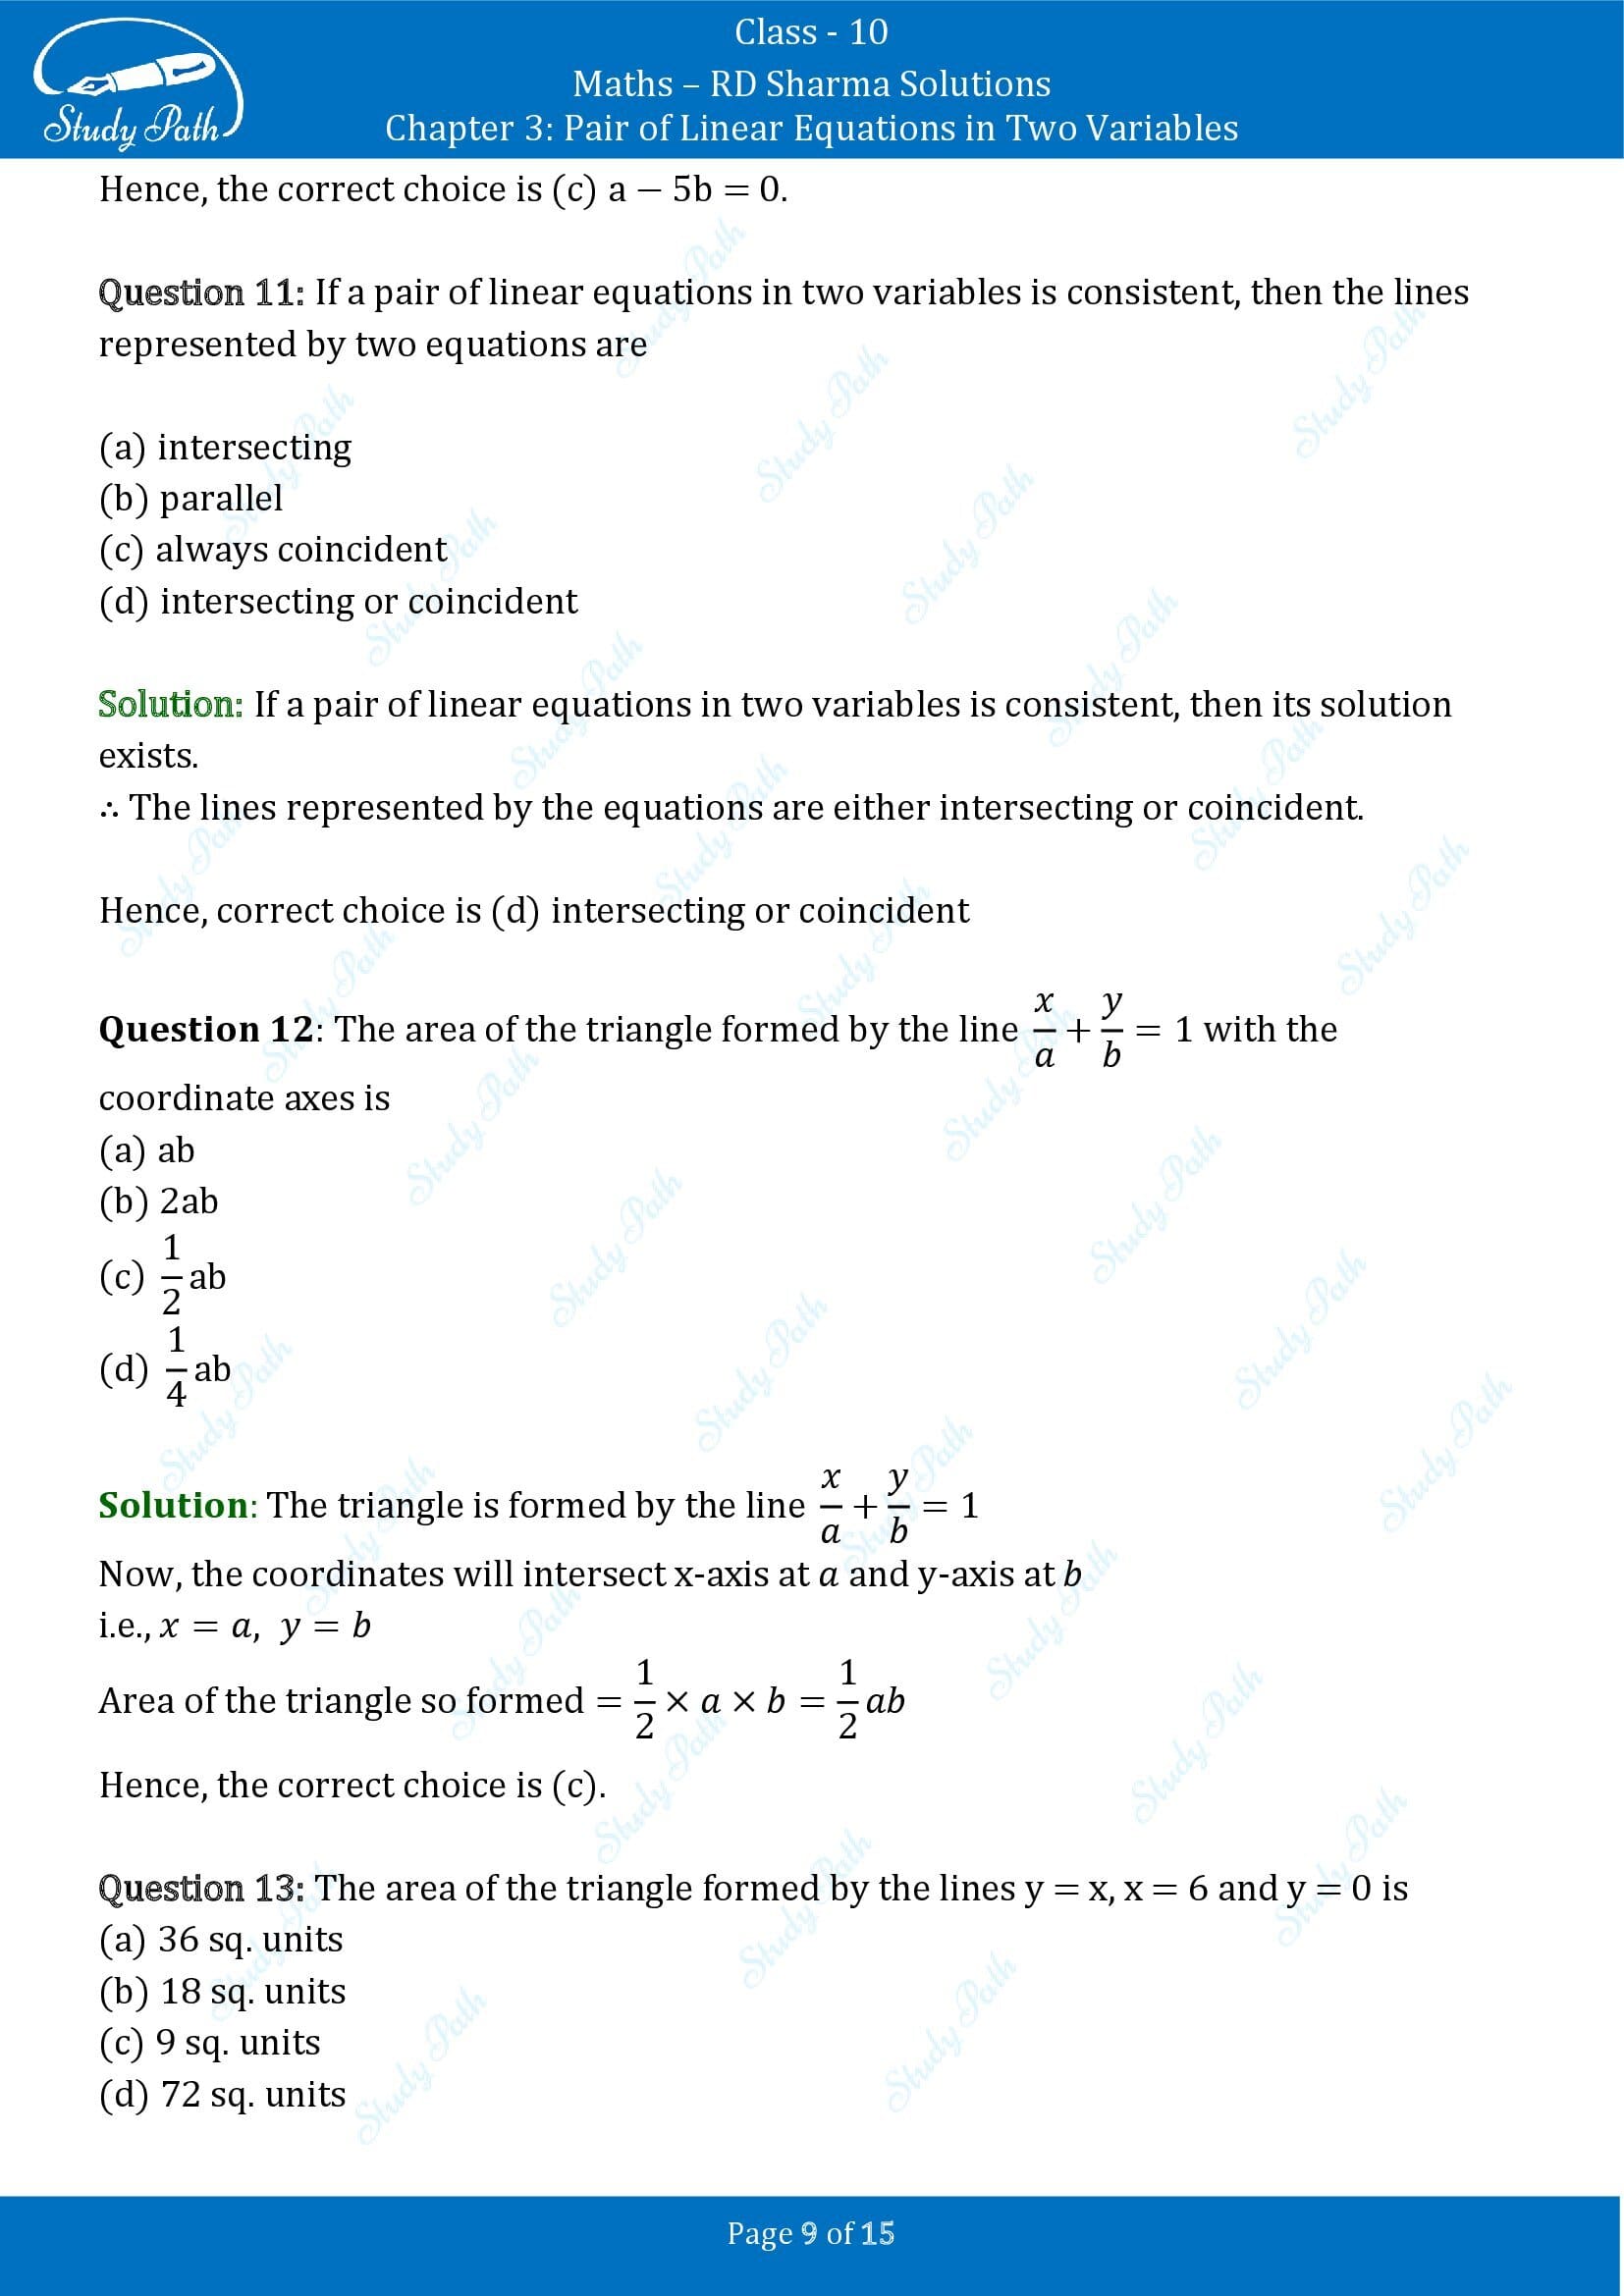 RD Sharma Solutions Class 10 Chapter 3 Pair of Linear Equations in Two Variables Multiple Choice Questions MCQs 00009